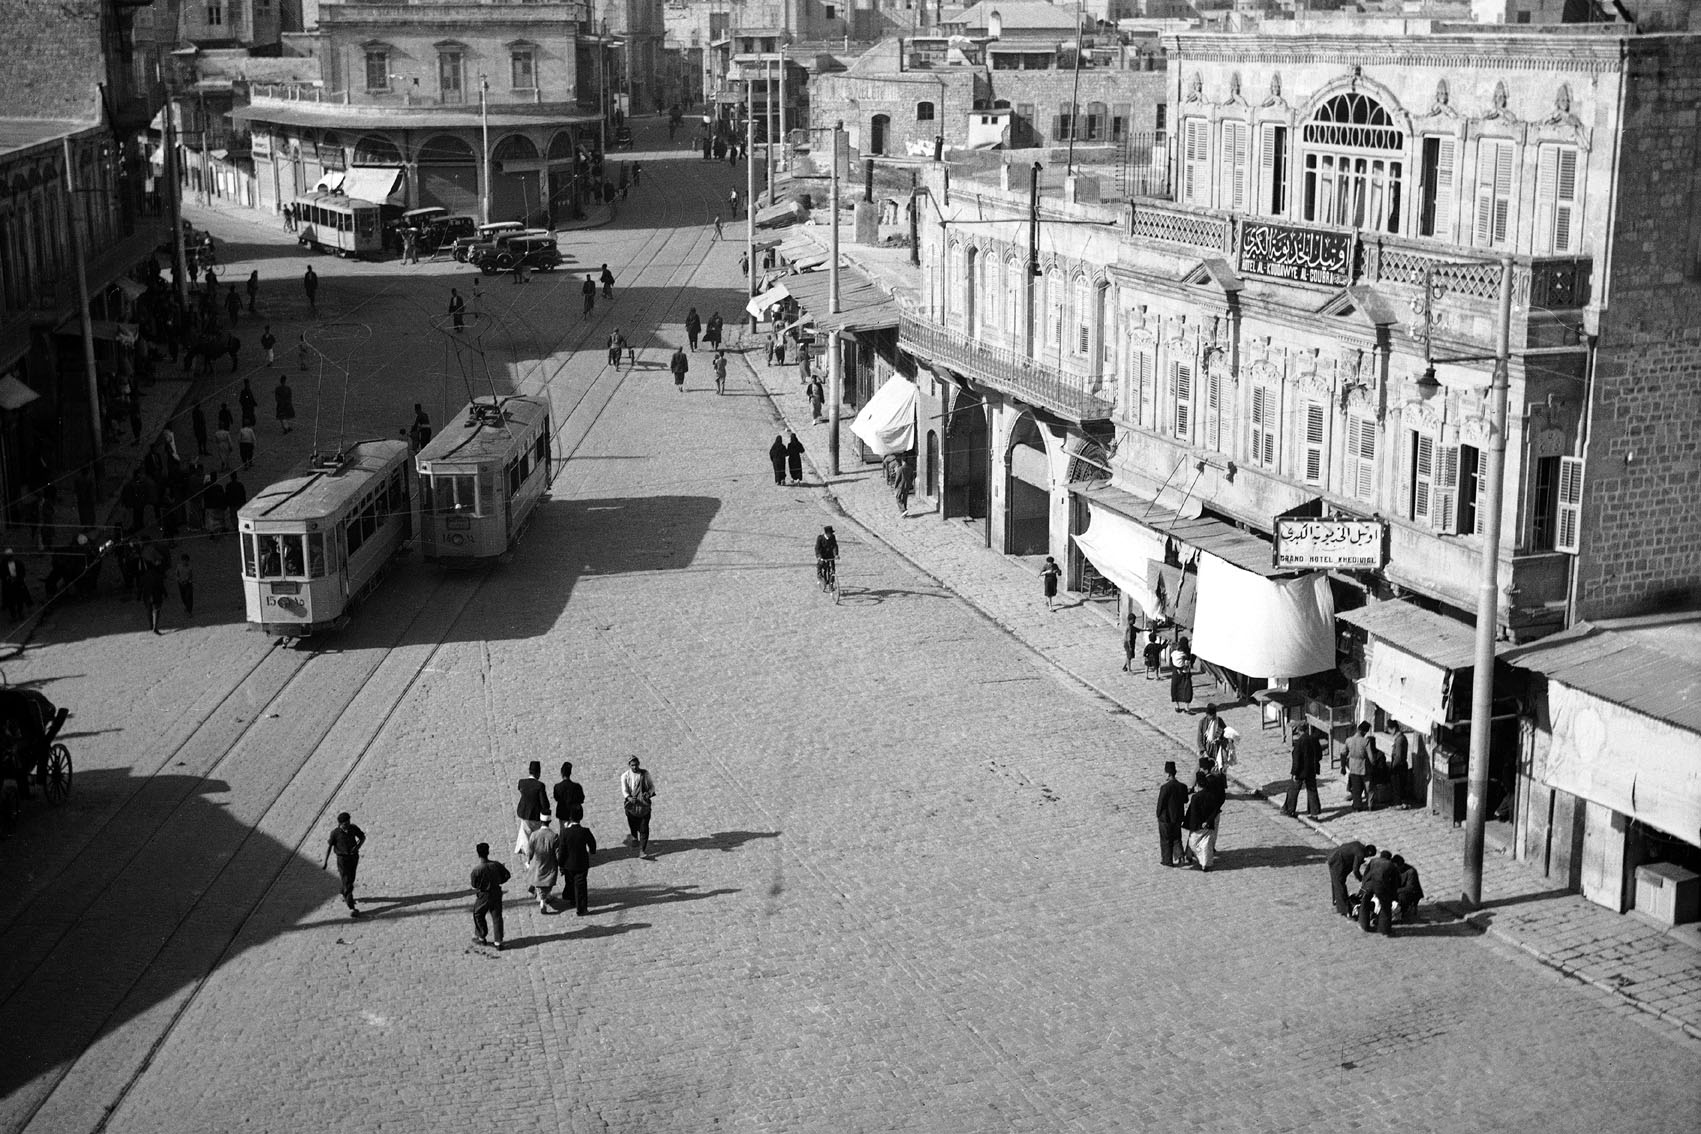 Section of public square known as Bab al-Faraj seen in 1937, part of the surrounding fabric of the gate demolished in 1904